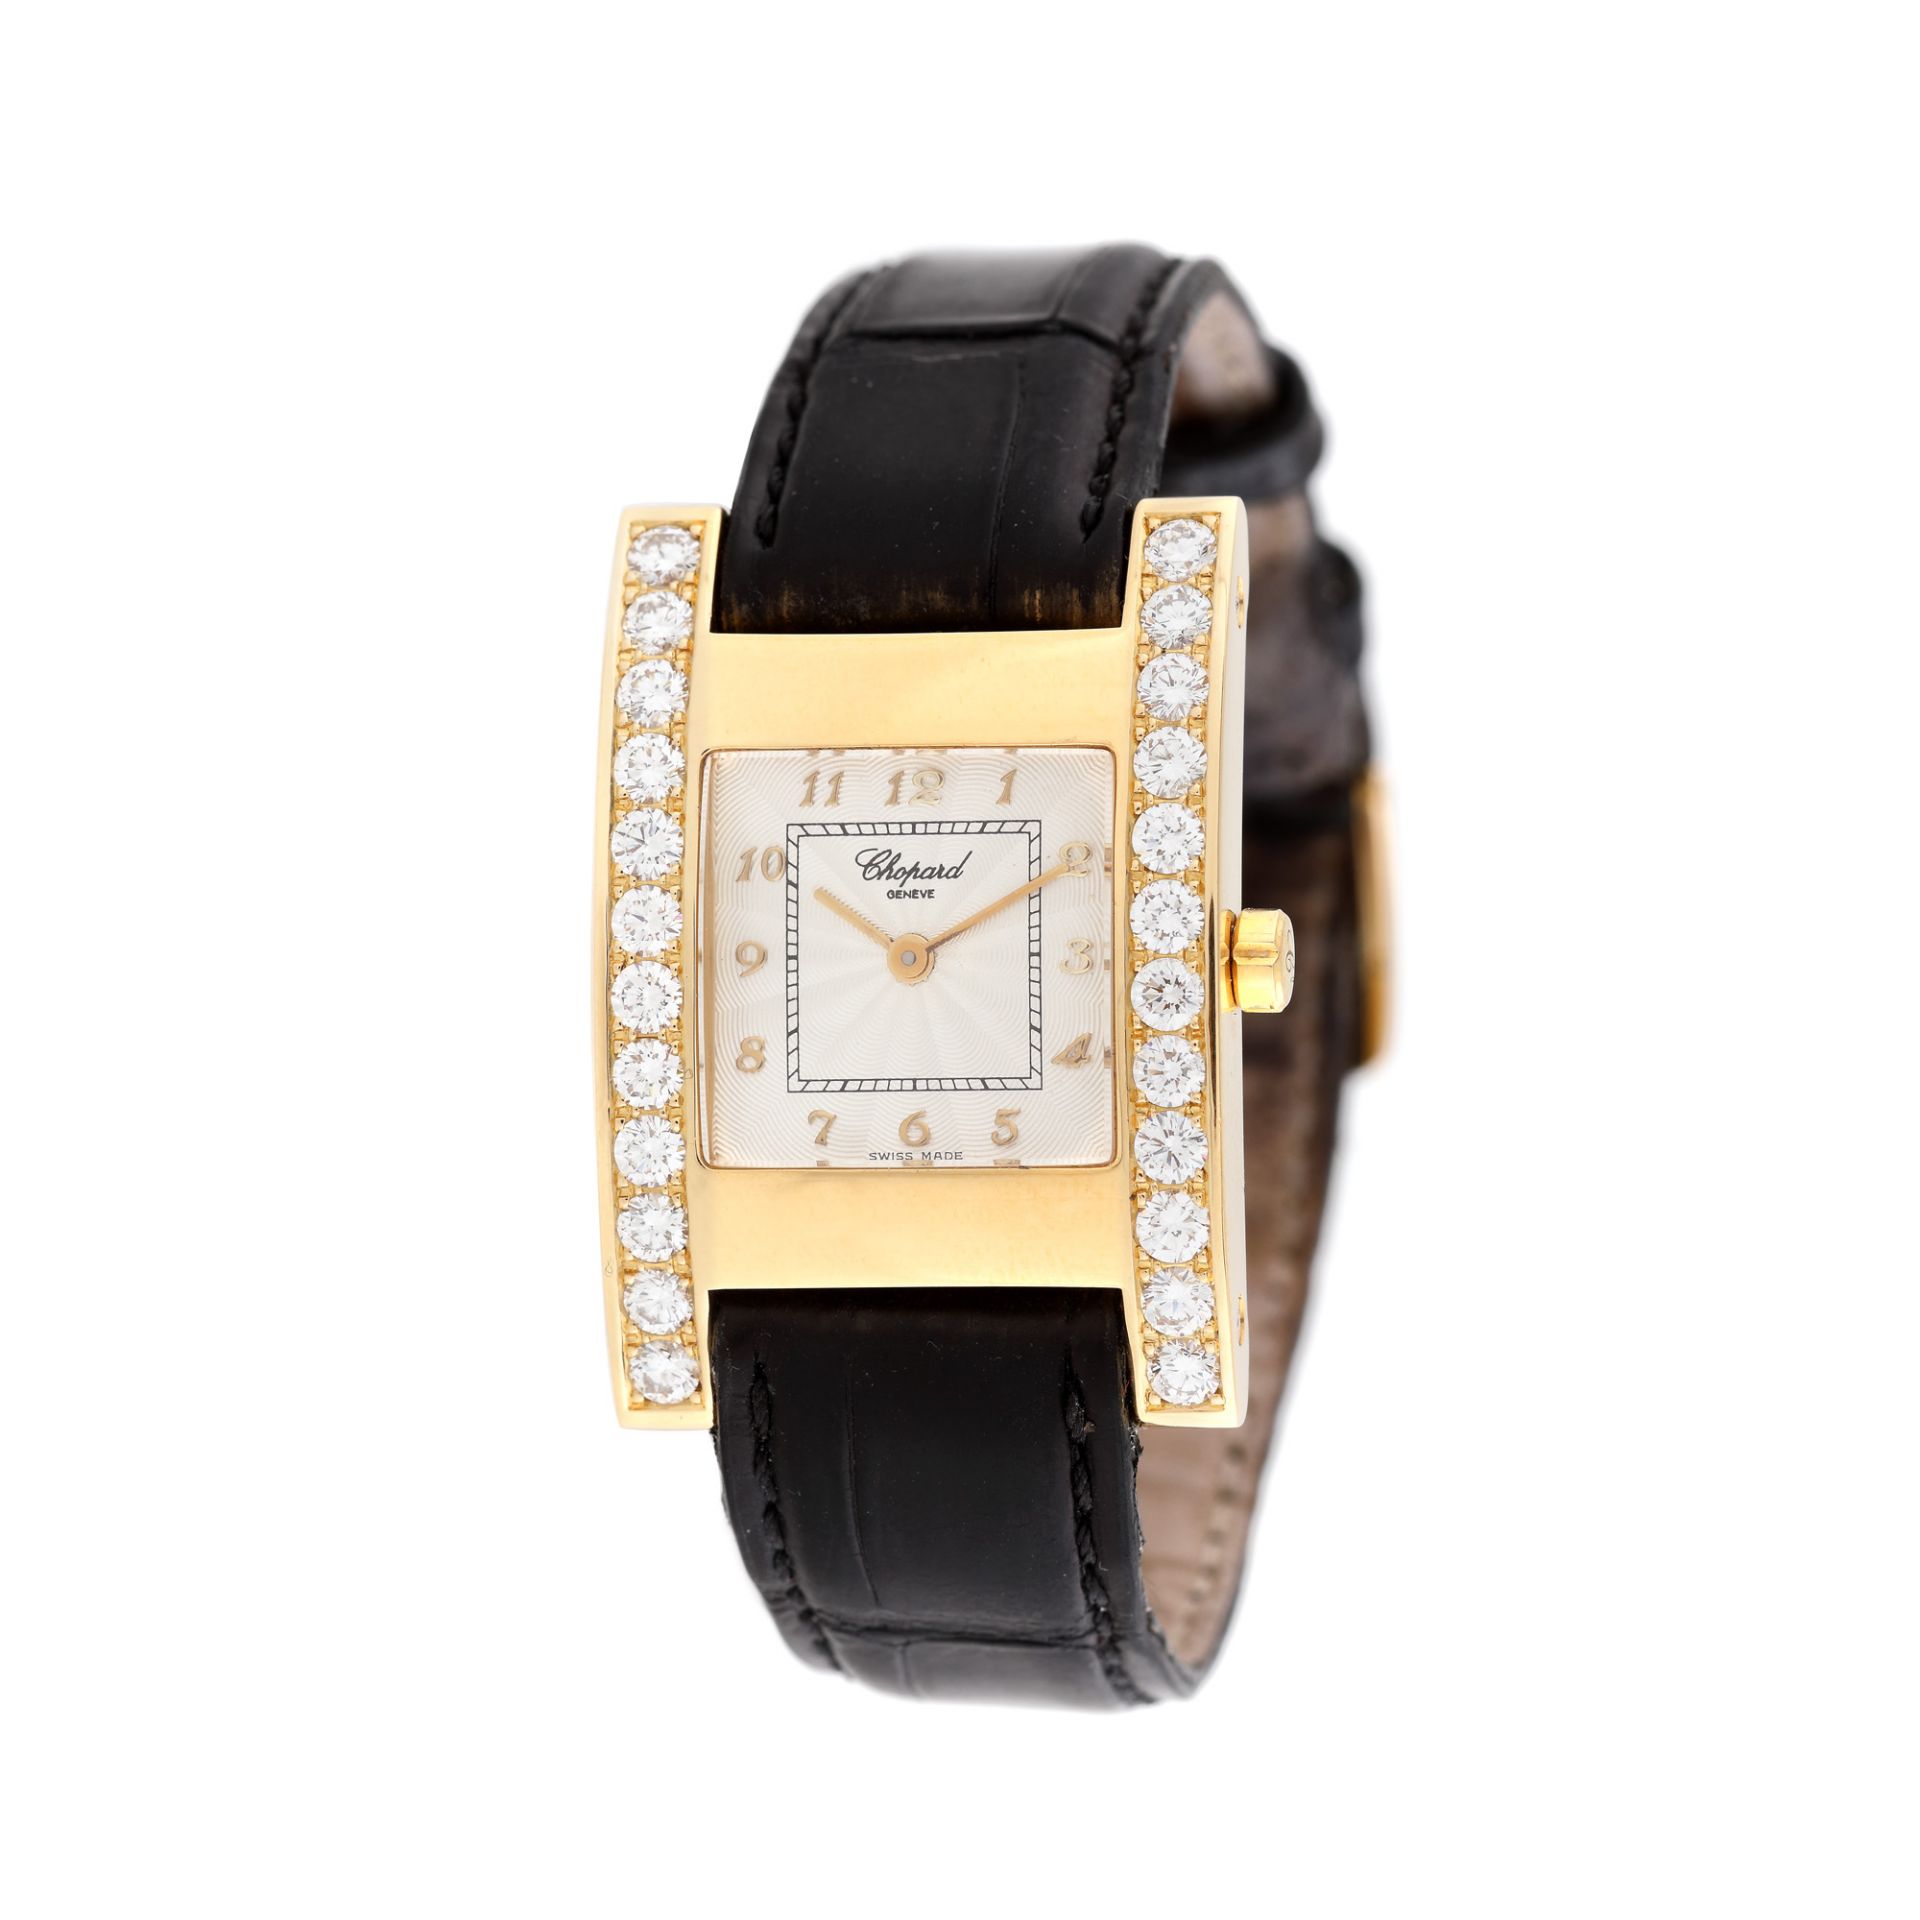 Chopard wristwatch, gold, women, decorated with diamondsChopard wristwatch, gold, women, decora